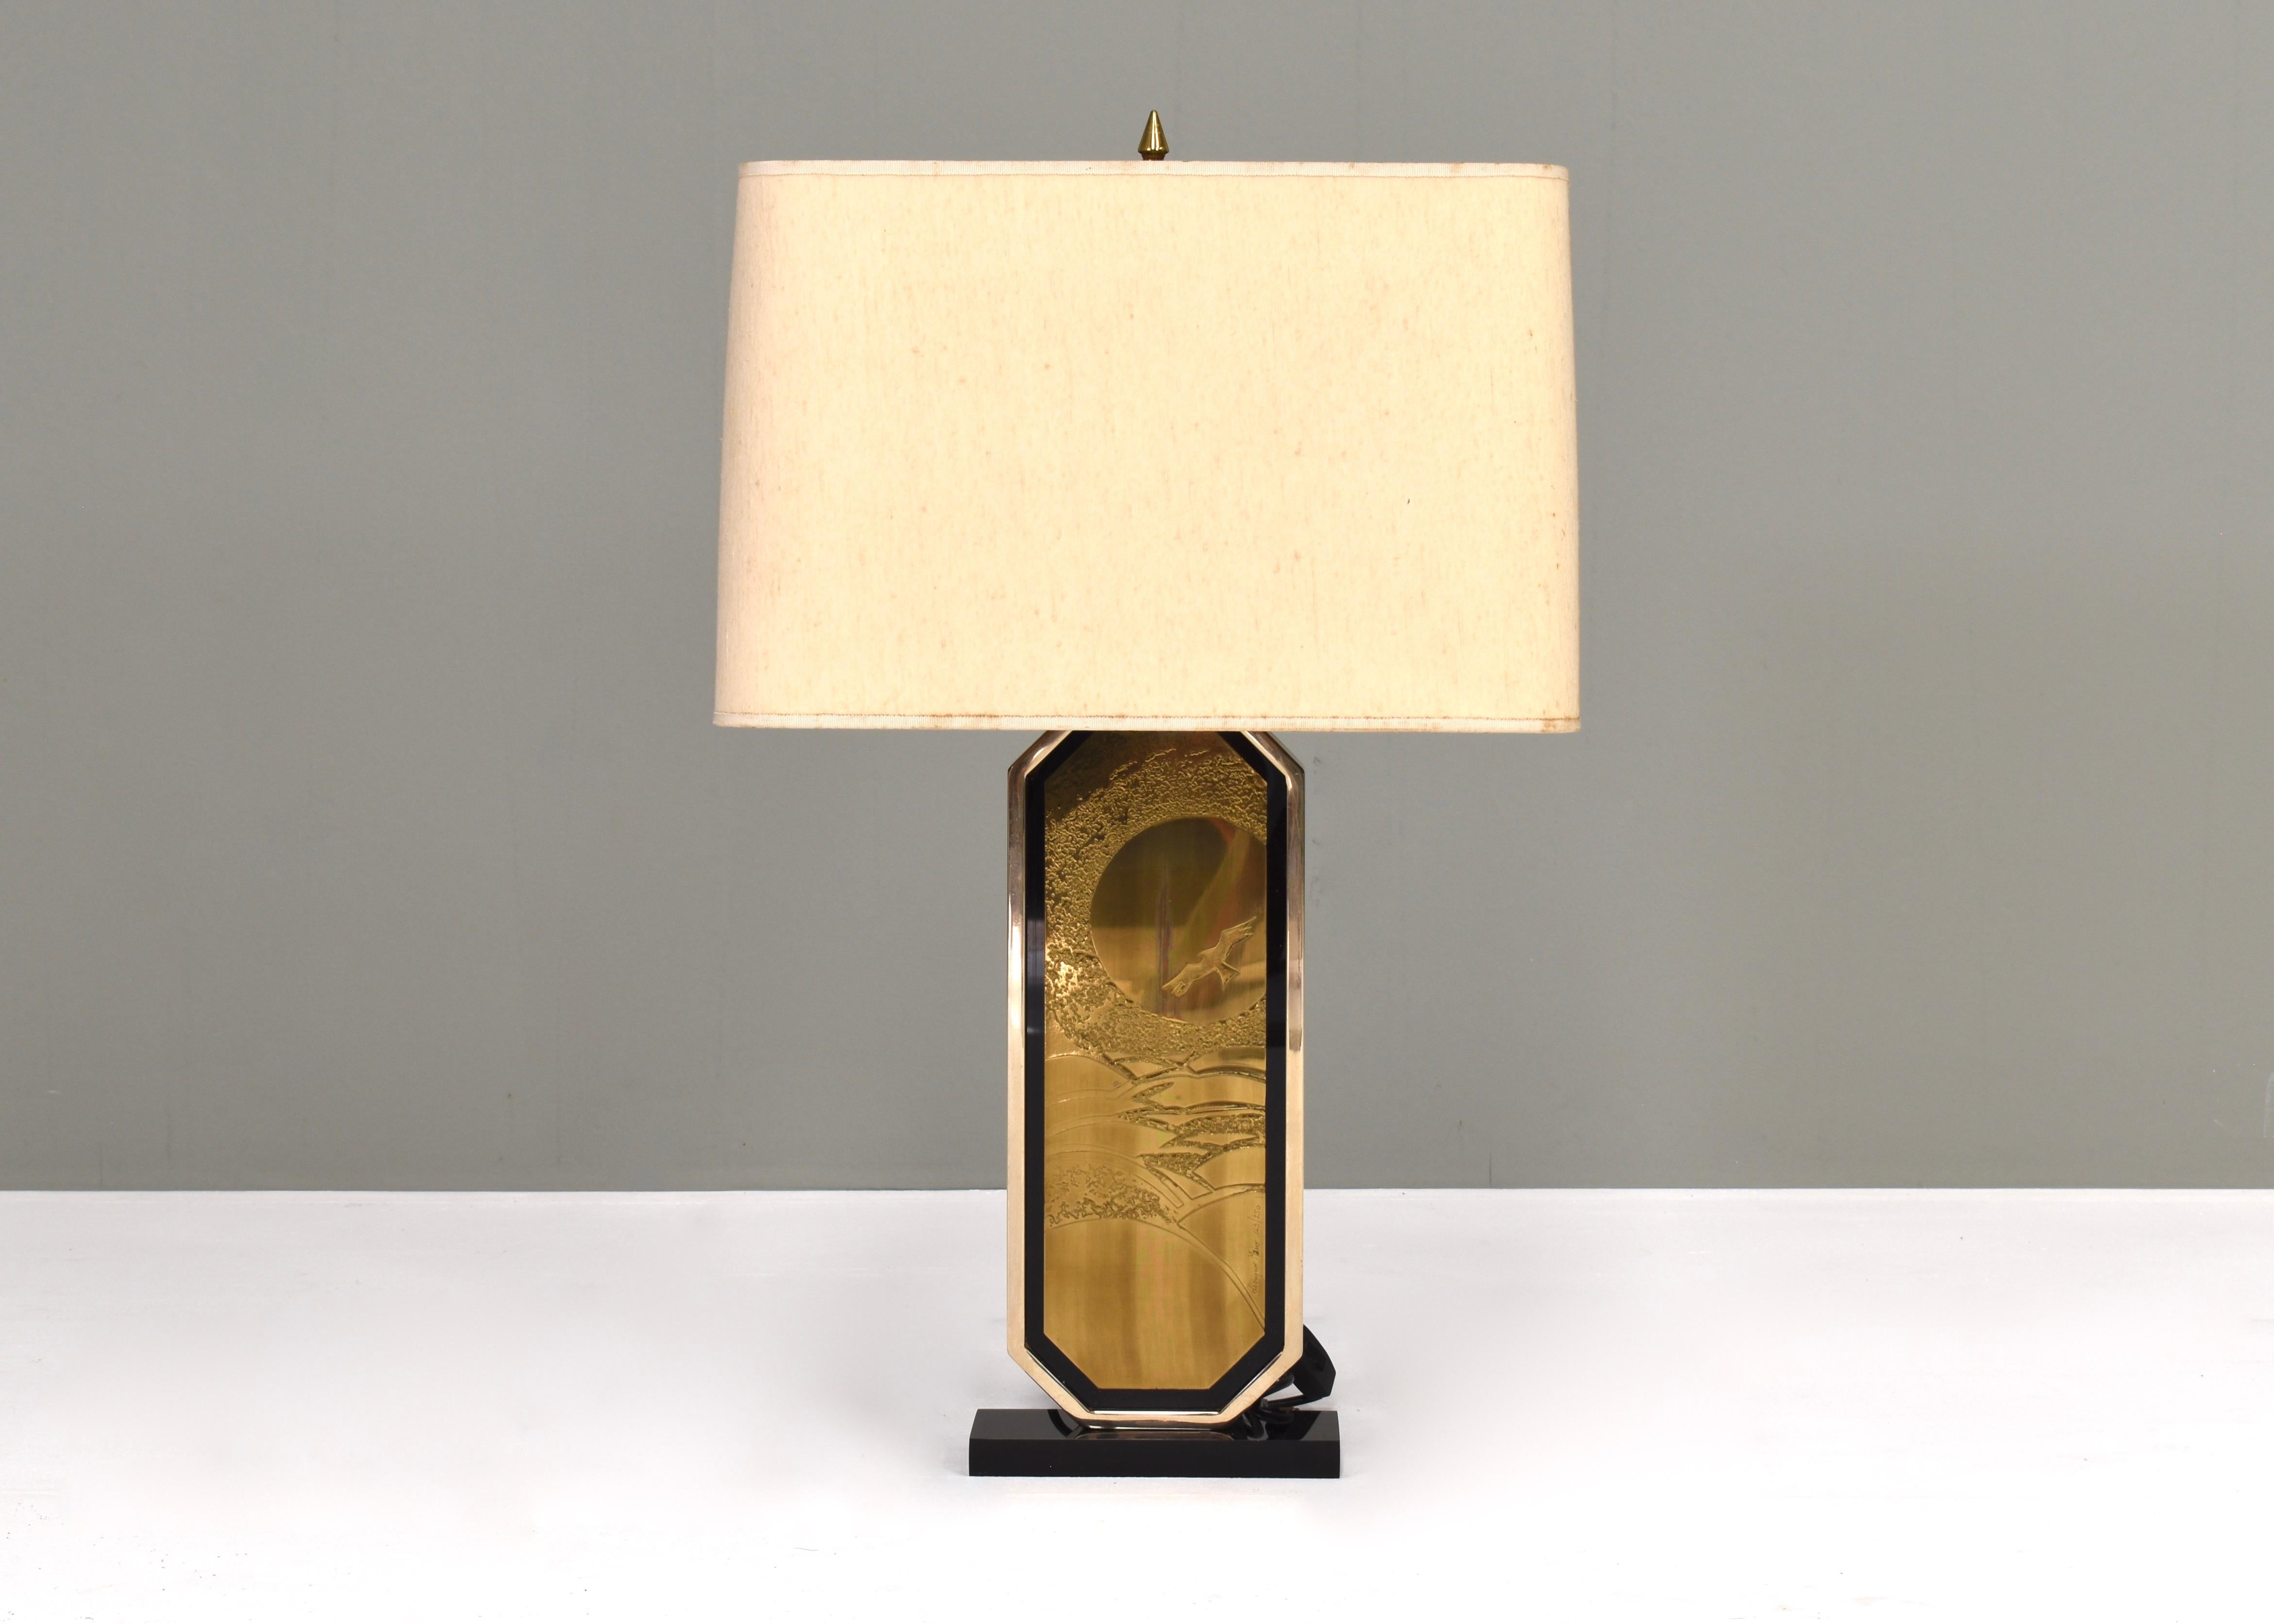 Brass engraved table lamp by Georges Mathias for Designo Maho – Belgium, circa 1970. This lamp is a limited edition nr 163 of 250 made.

The lamp is signed: Designo Maho 163\250

Designer: Georges Mathias
Manufacturer: Maho. Engraved: Designo